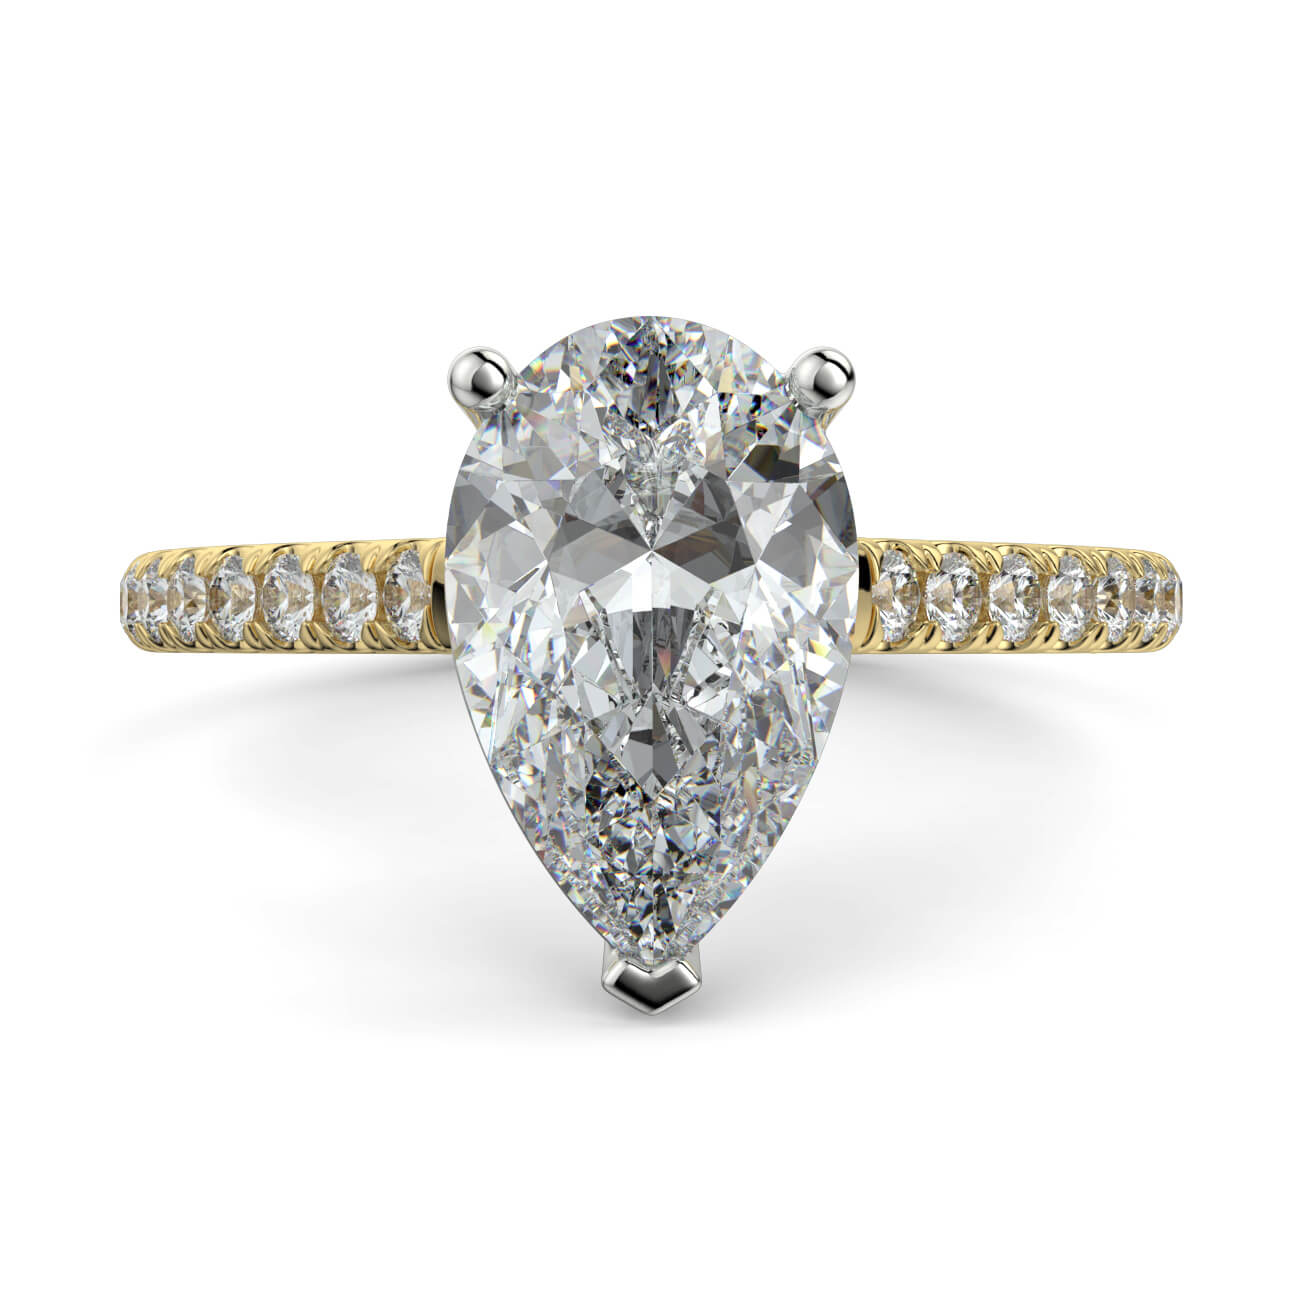 Pear shape diamond cathedral engagement ring in yellow and white gold – Australian Diamond Network